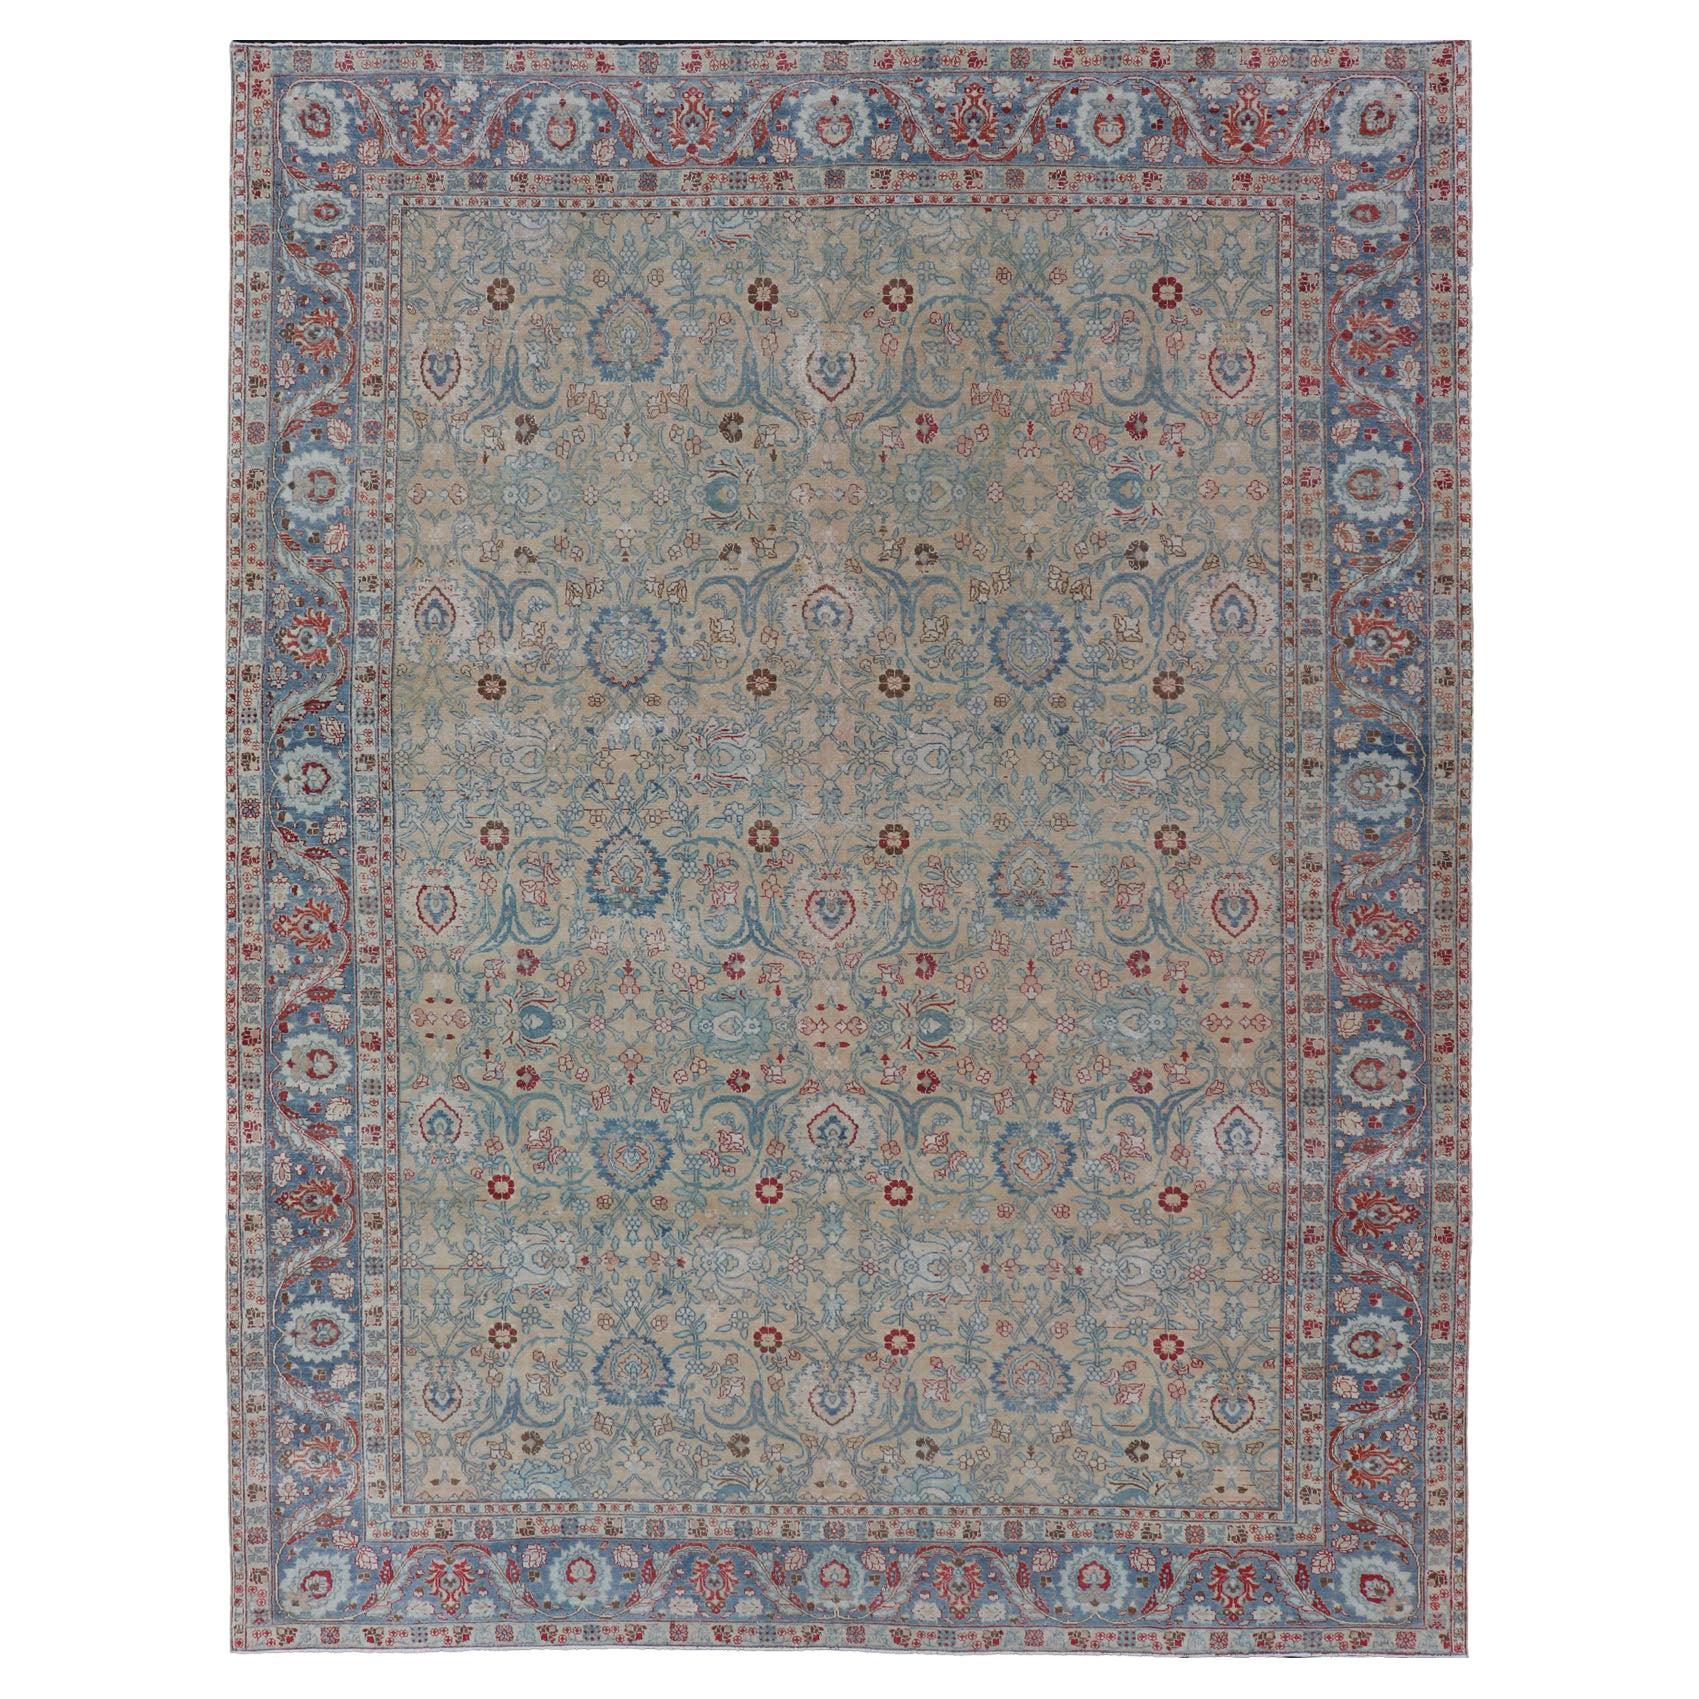  Antique Persian Khorassan Rug with Floral Design in Honey Cream & Dusty Blue